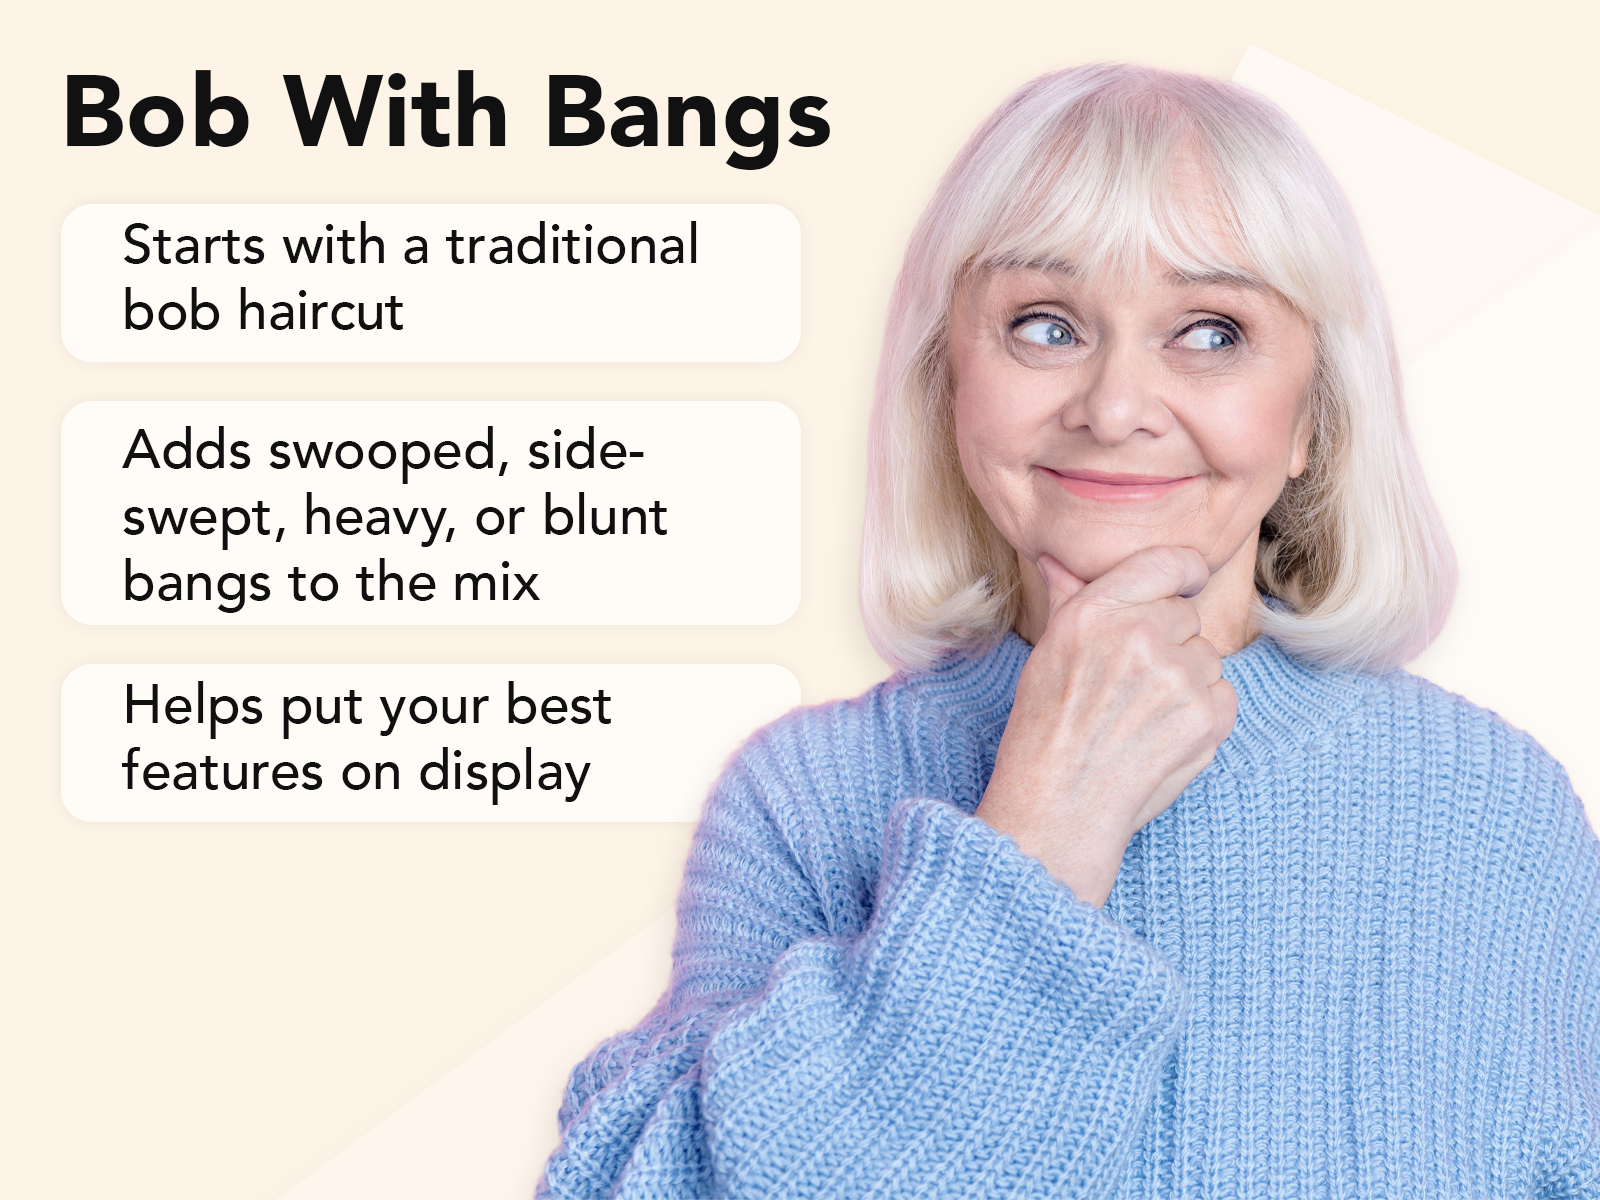 Bob with bangs explainer image on a tan background with key attributes of the style on the left